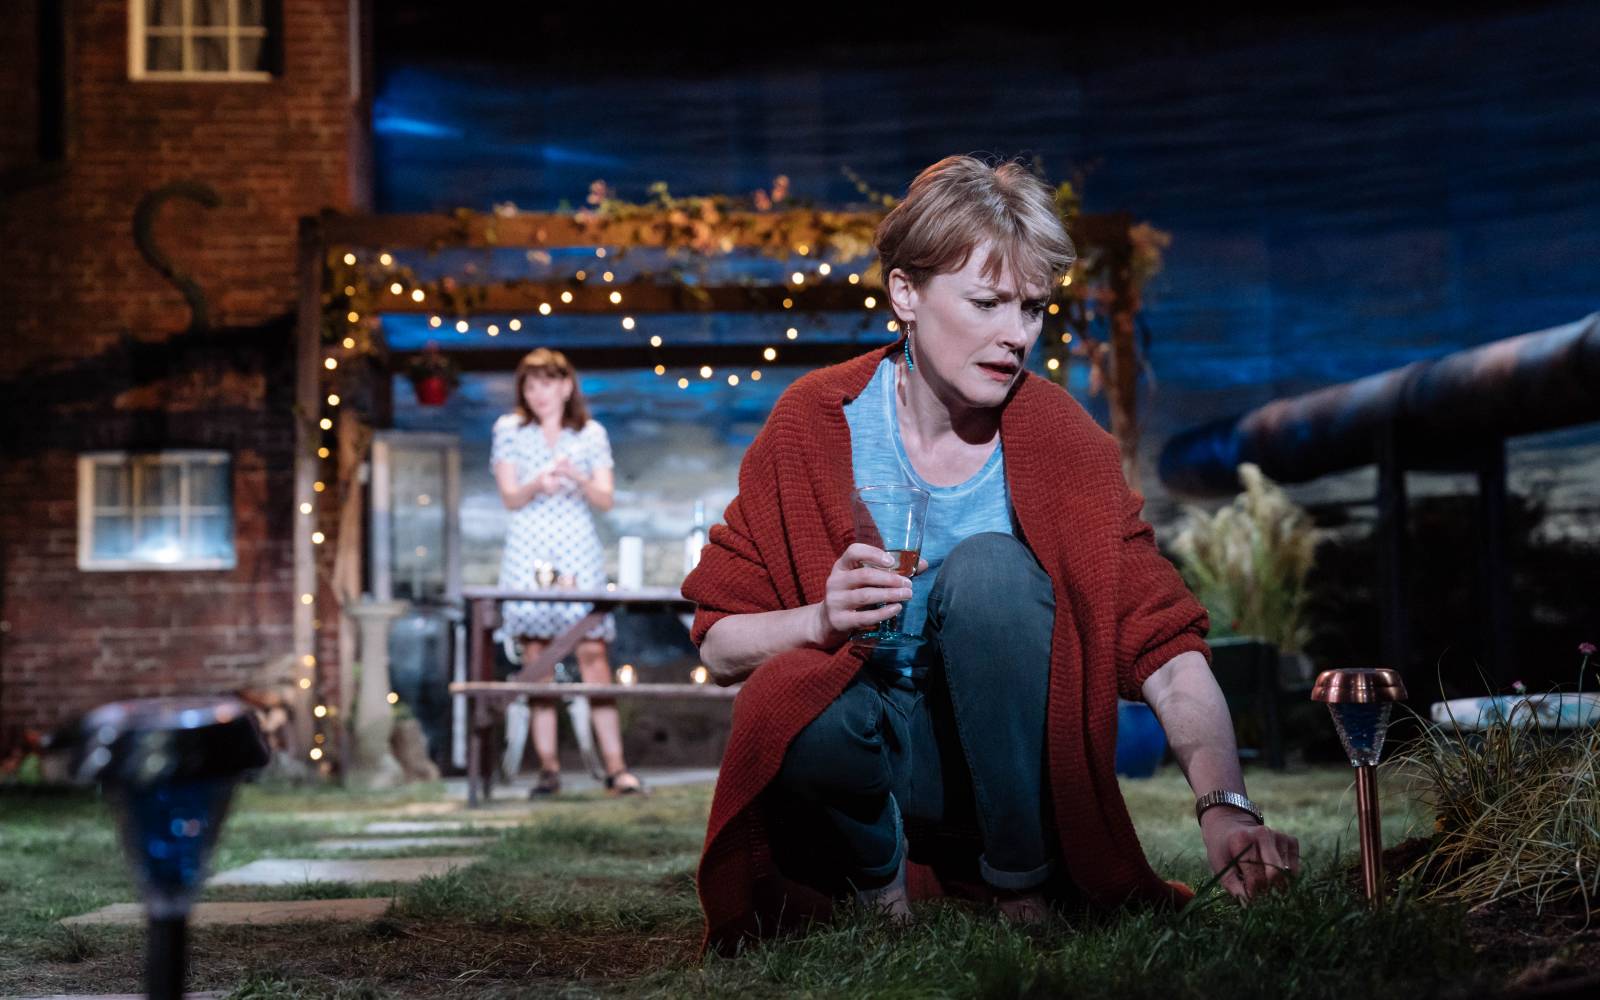 Night. A woman crouches, wine glass in hand, inspecting a patch of grass. In the background, a younger woman looks on